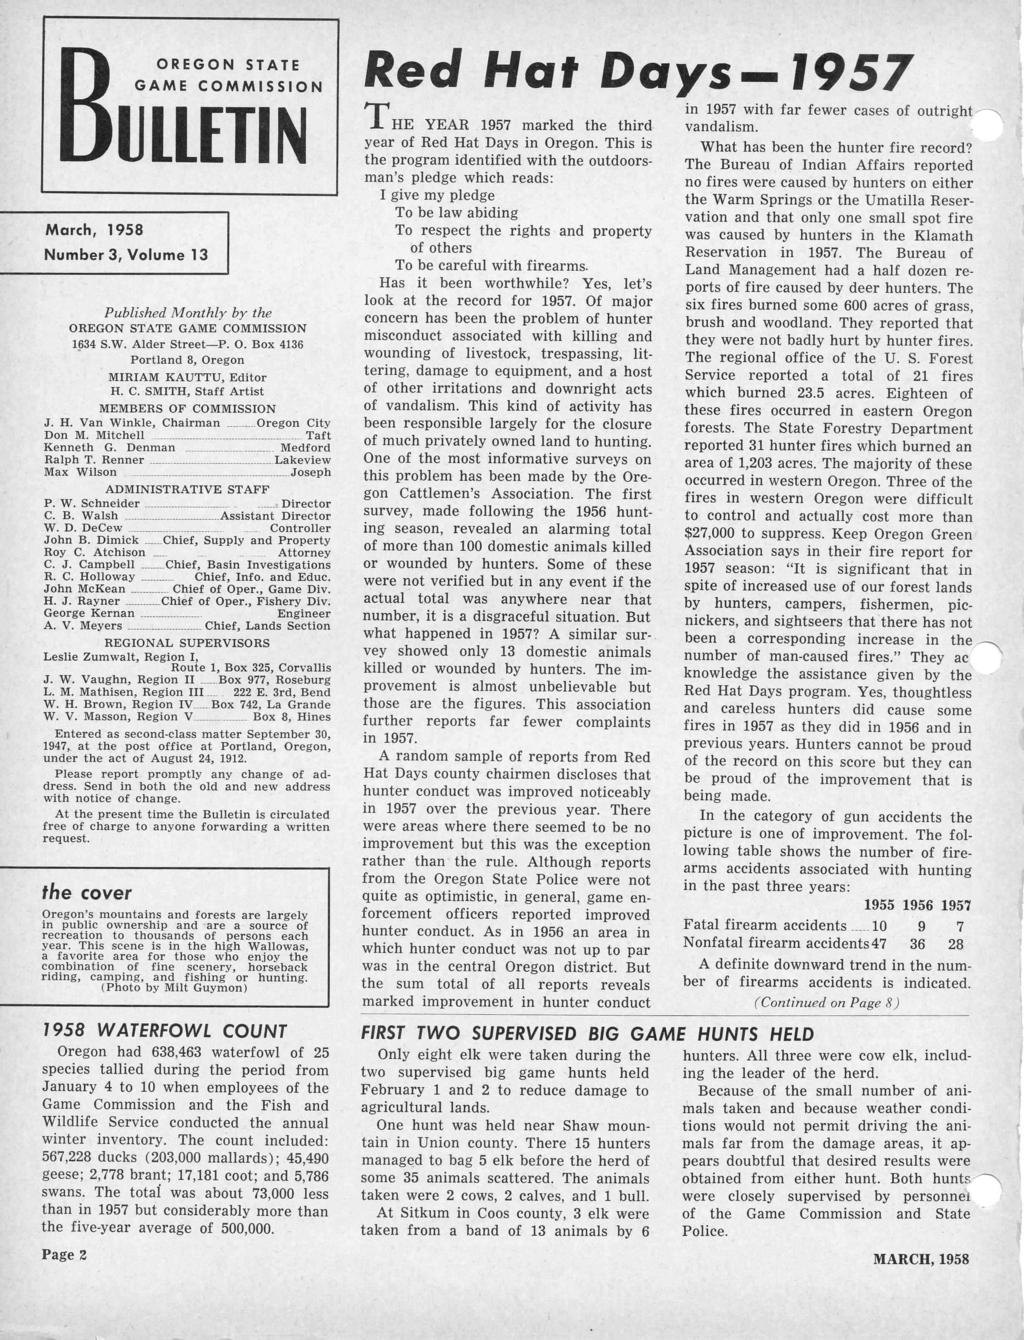 S T A TE GAME COMMISSION ULLETIN March, 1958 Number 3, Volume 13 Published Monthly by the OREGON STATE GAME COMMISSION 1634 S.W. Alder StreetP. 0. Box 4136 Portland 8, Oregon MIRIAM KAUTTU, Editor H.